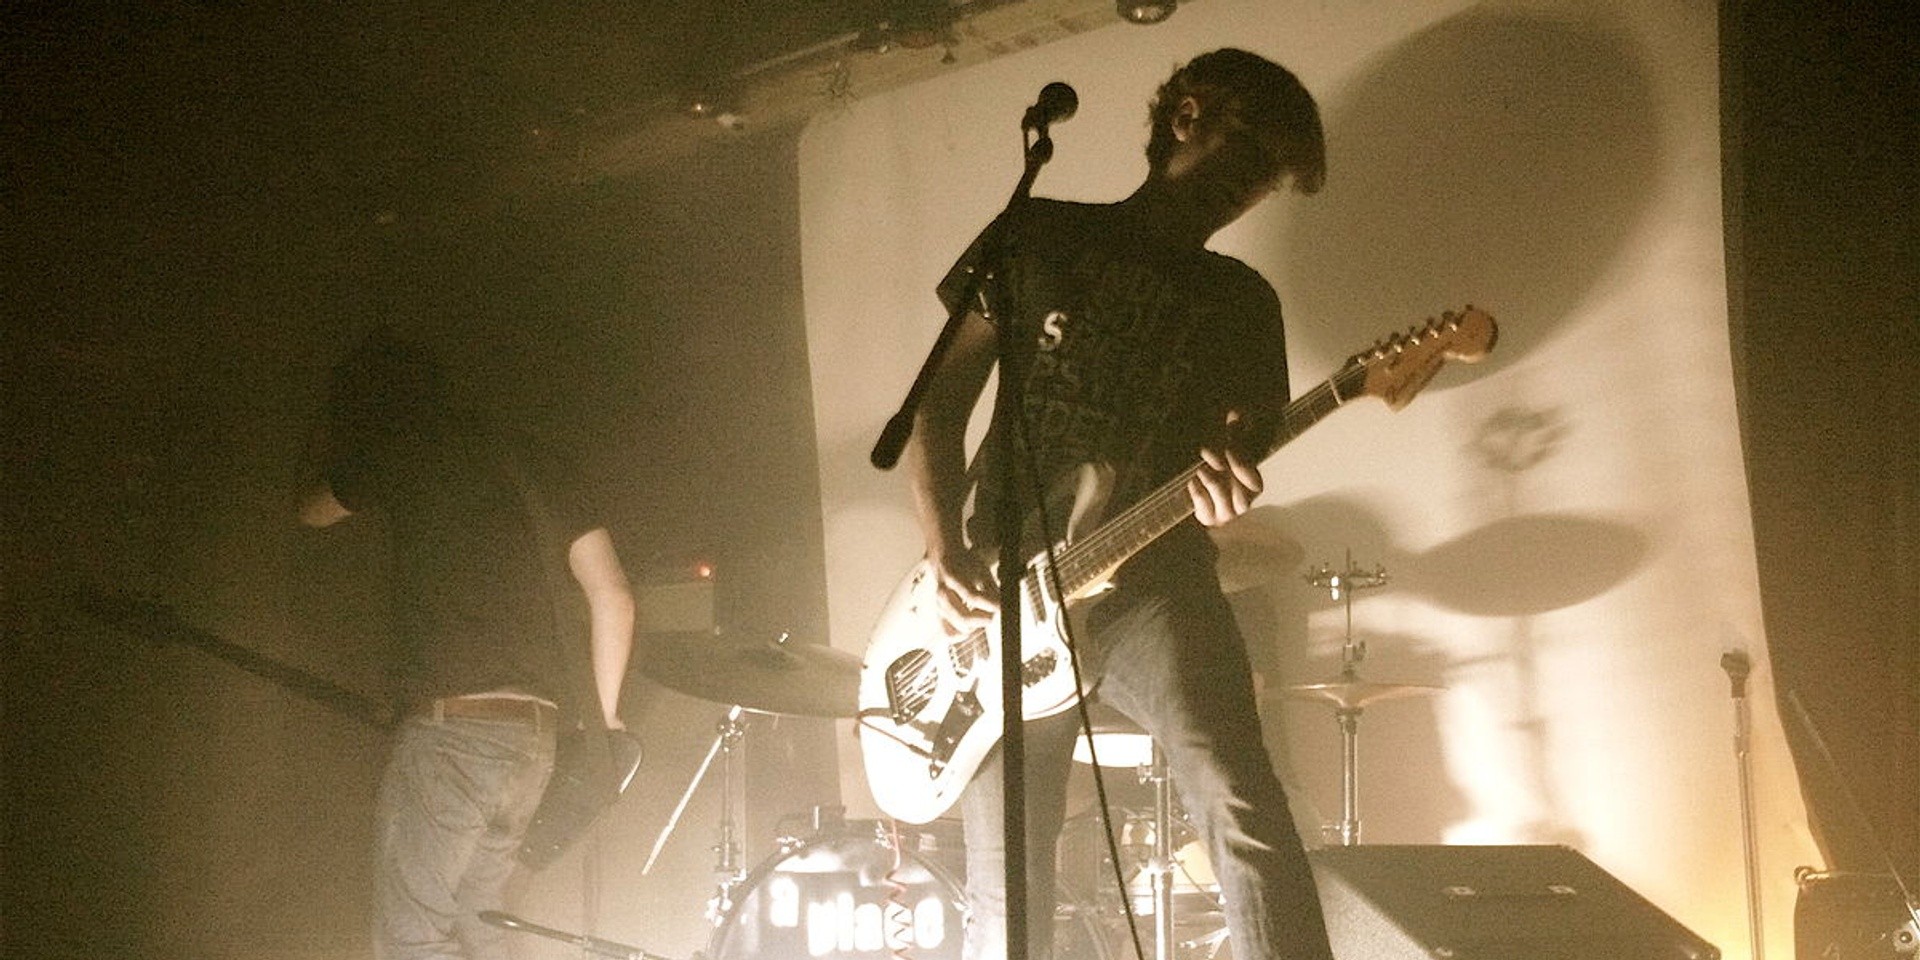 A Place To Bury Strangers' gig in Singapore cancelled